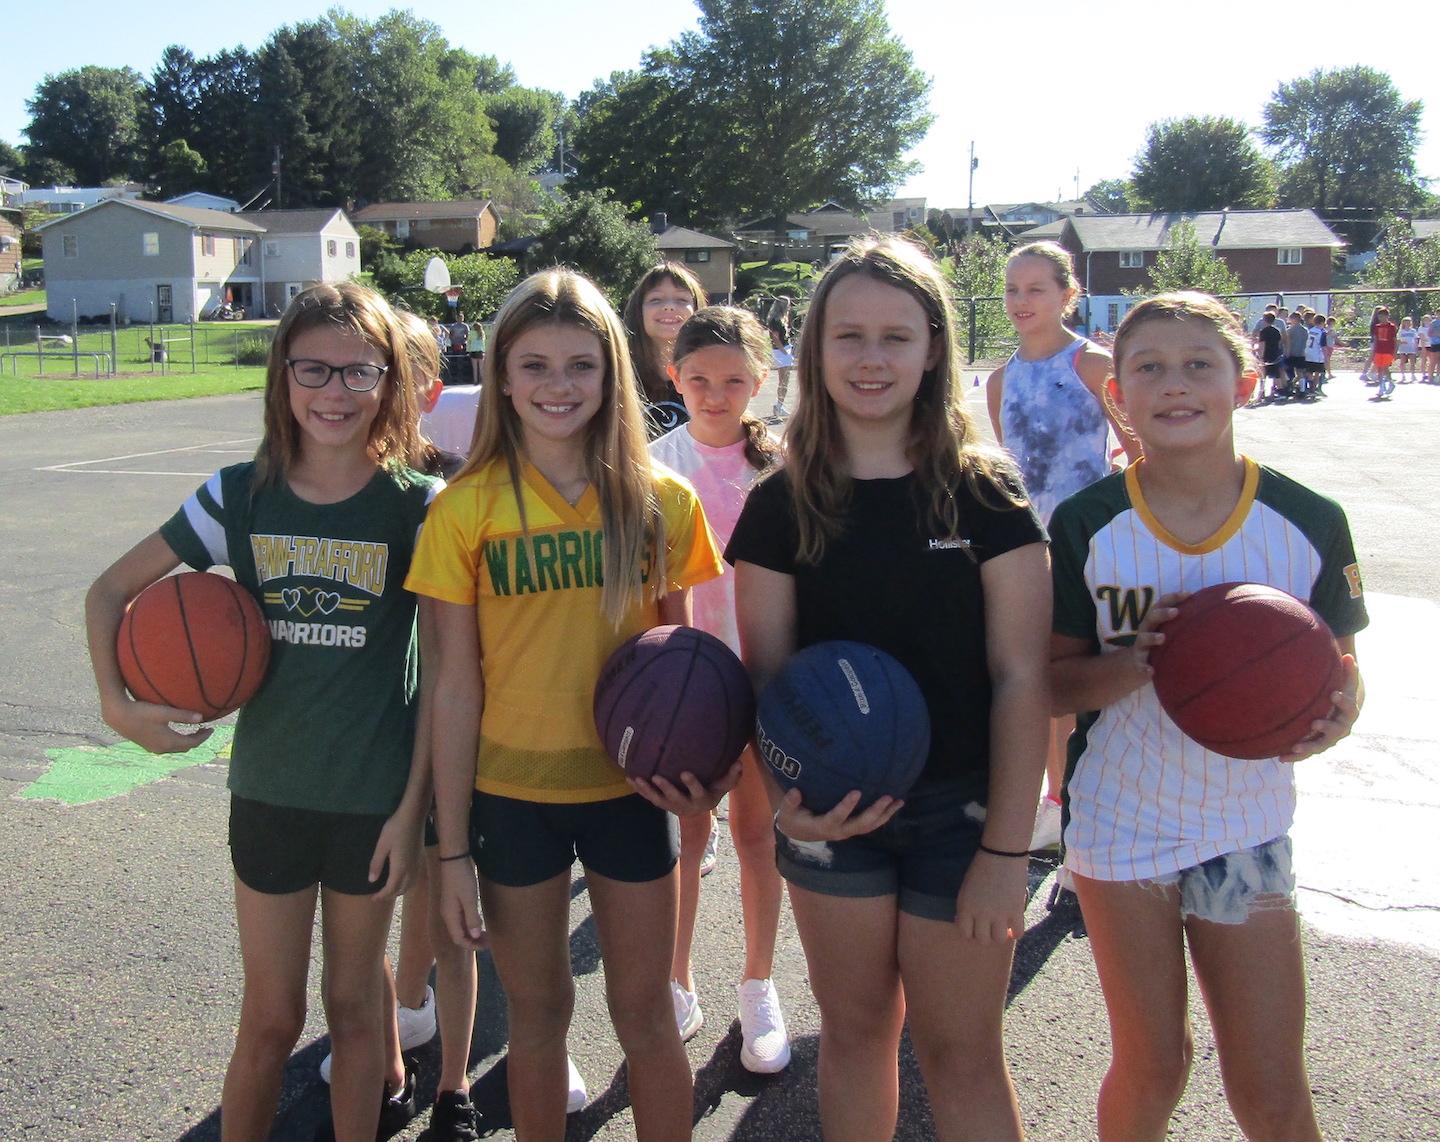 Fifth-graders Adrianna Chapkis, Sydney Ponko, Breanna Walker and Natalia Gunstrom spend some time on the basketball court